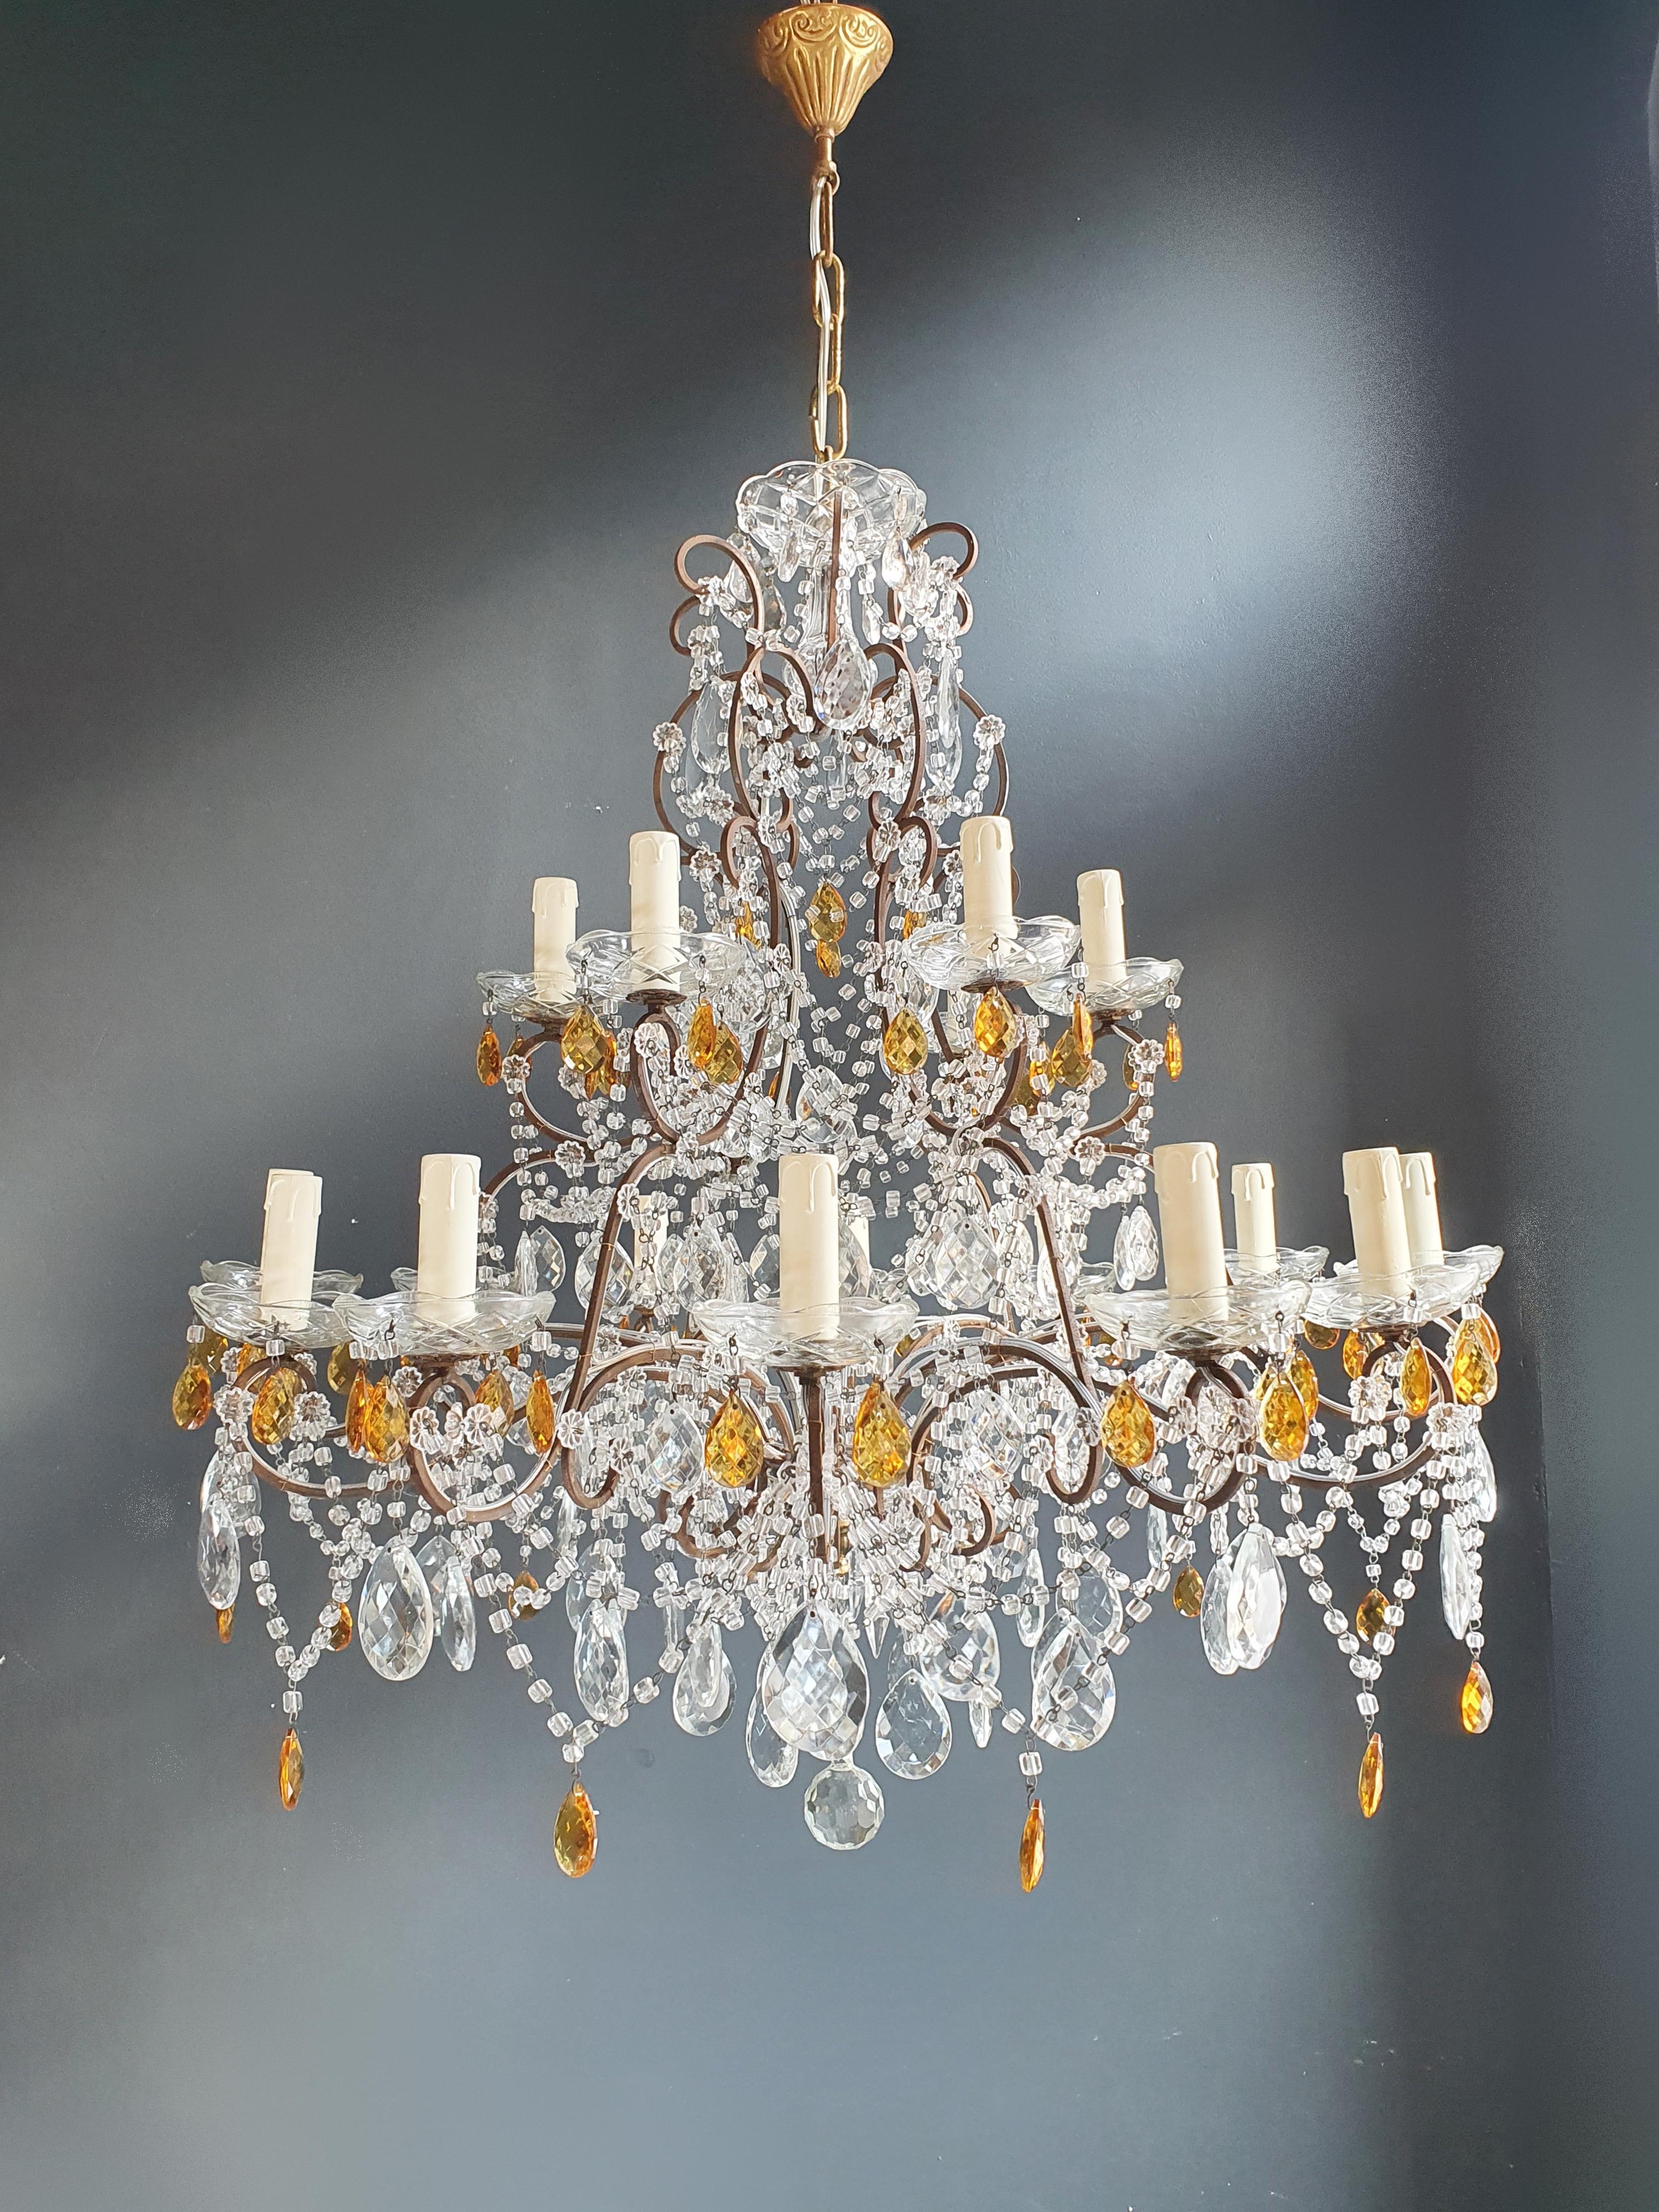 Antique Chandelier, Lovingly Restored in Berlin and Ready to Illuminate Your Space

Embrace the charm of yesteryears with this antique chandelier, meticulously restored in Berlin to marry vintage allure with modern functionality. Its electrical